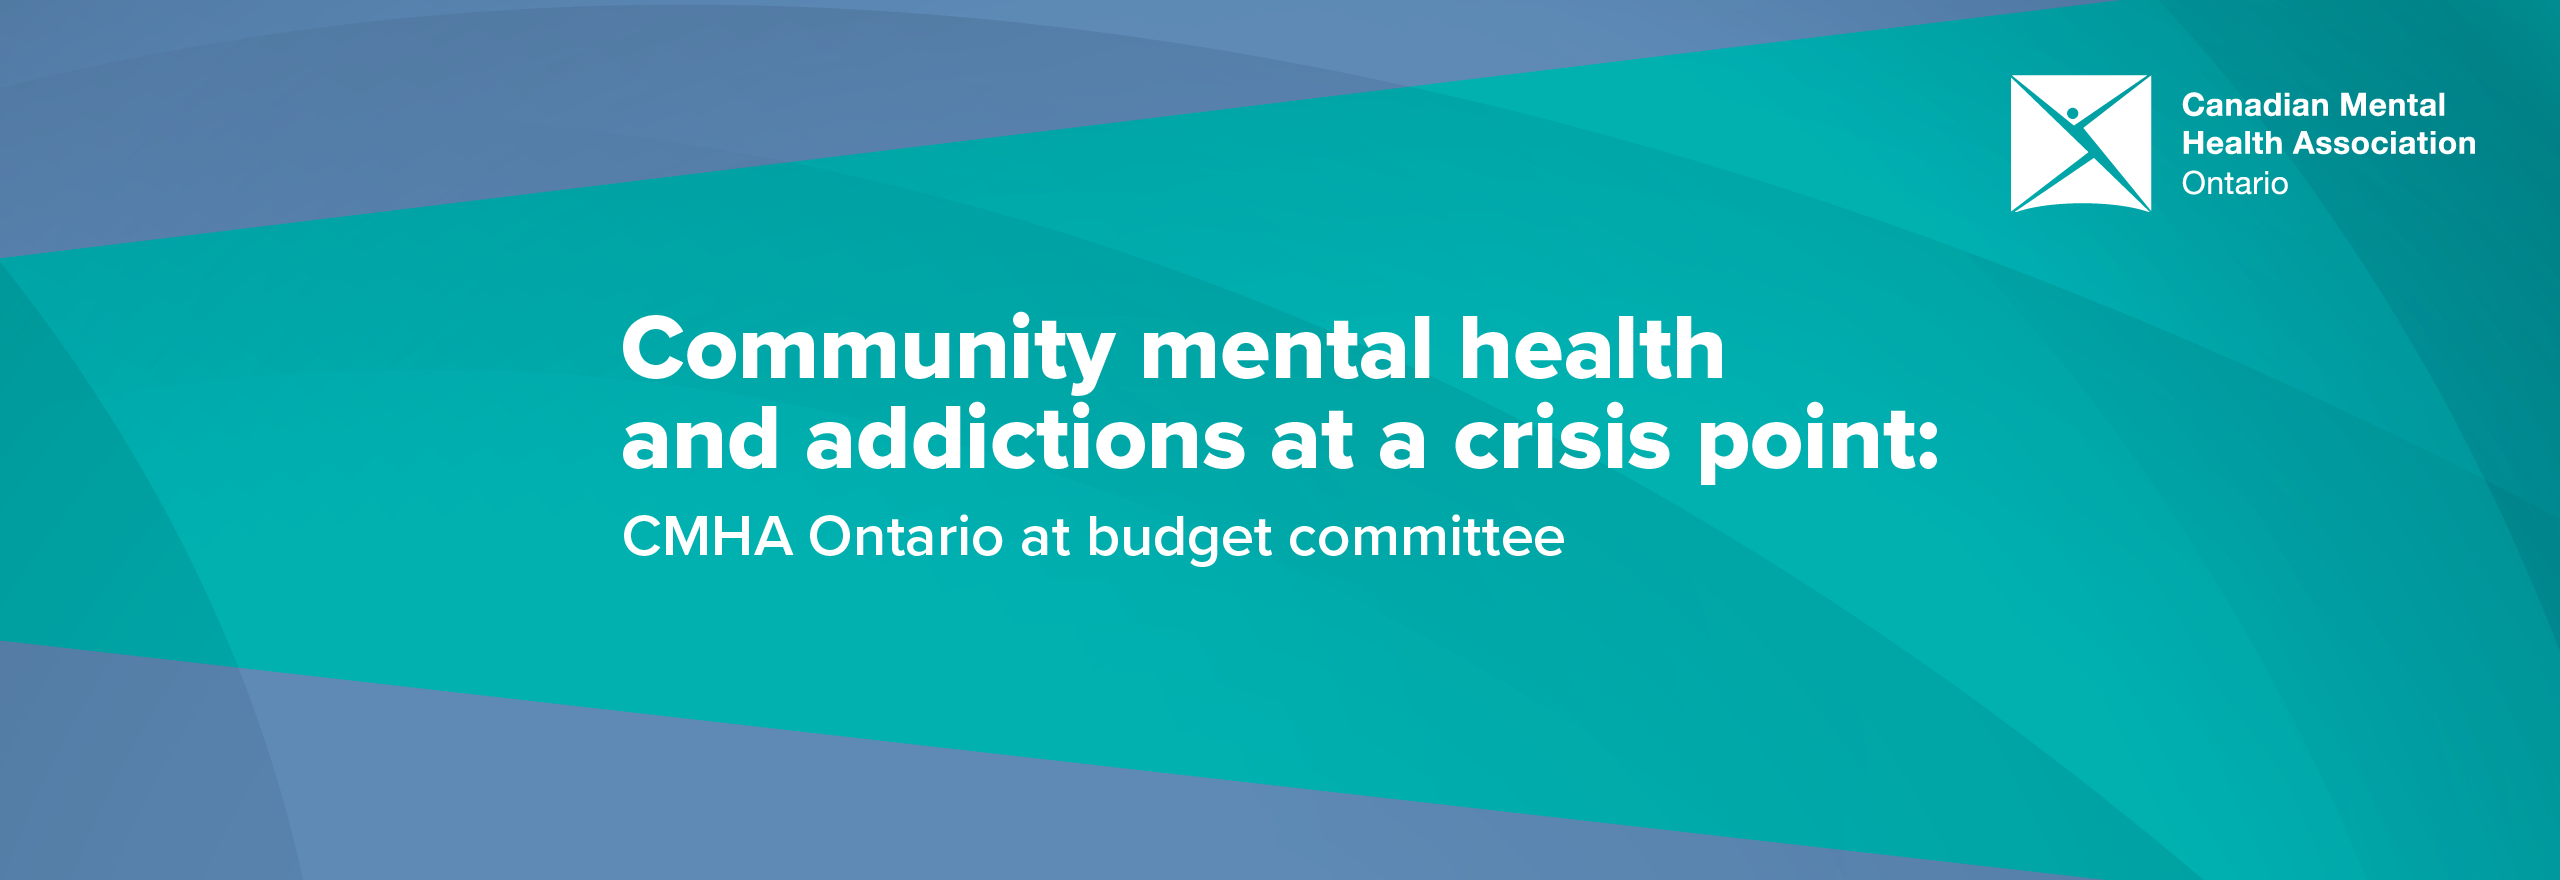 Community mental health and addictions at a crisis point:  CMHA Ontario at budget committee